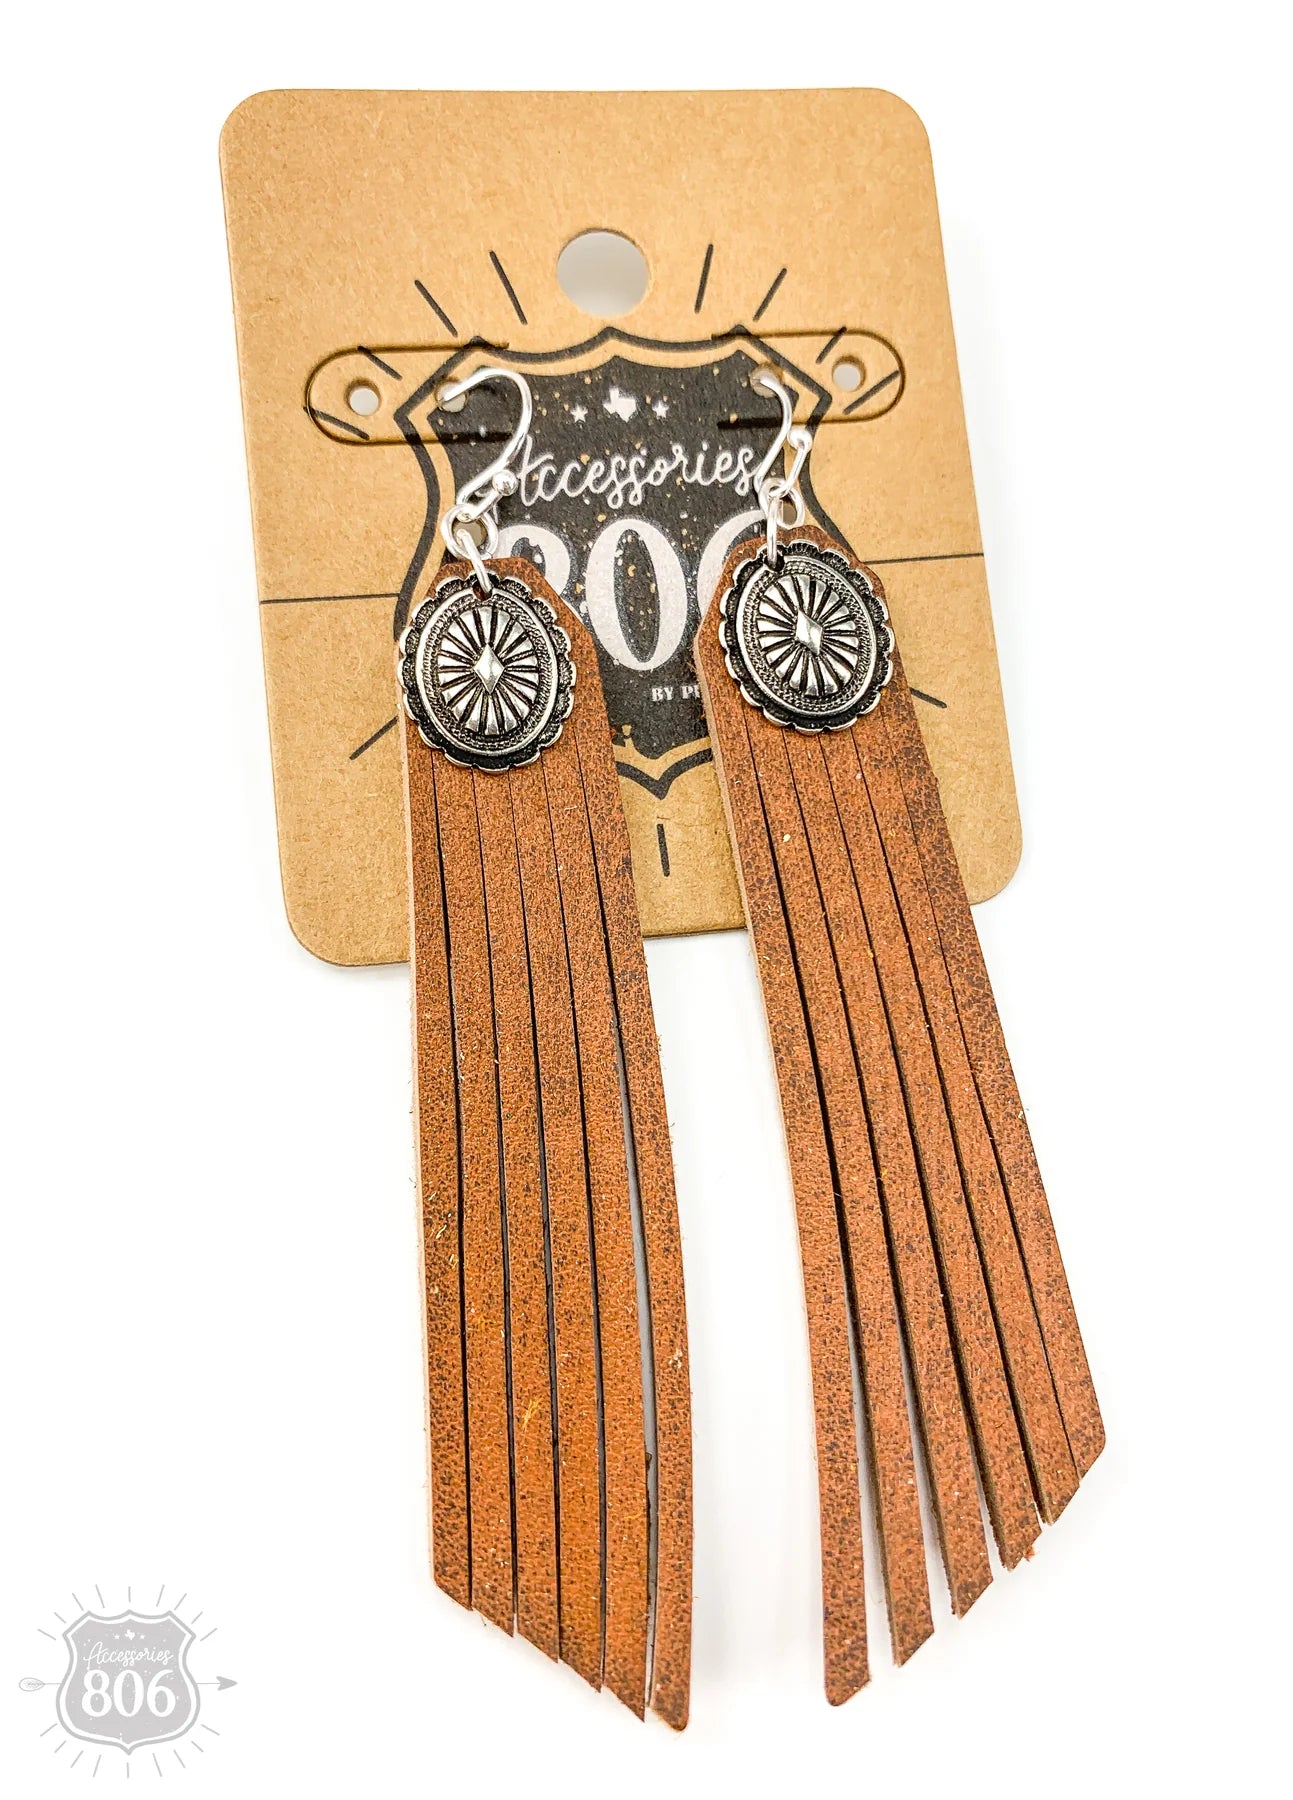 Silver Concho & Leather Fringe Earrings - Cowgirl Jewelry